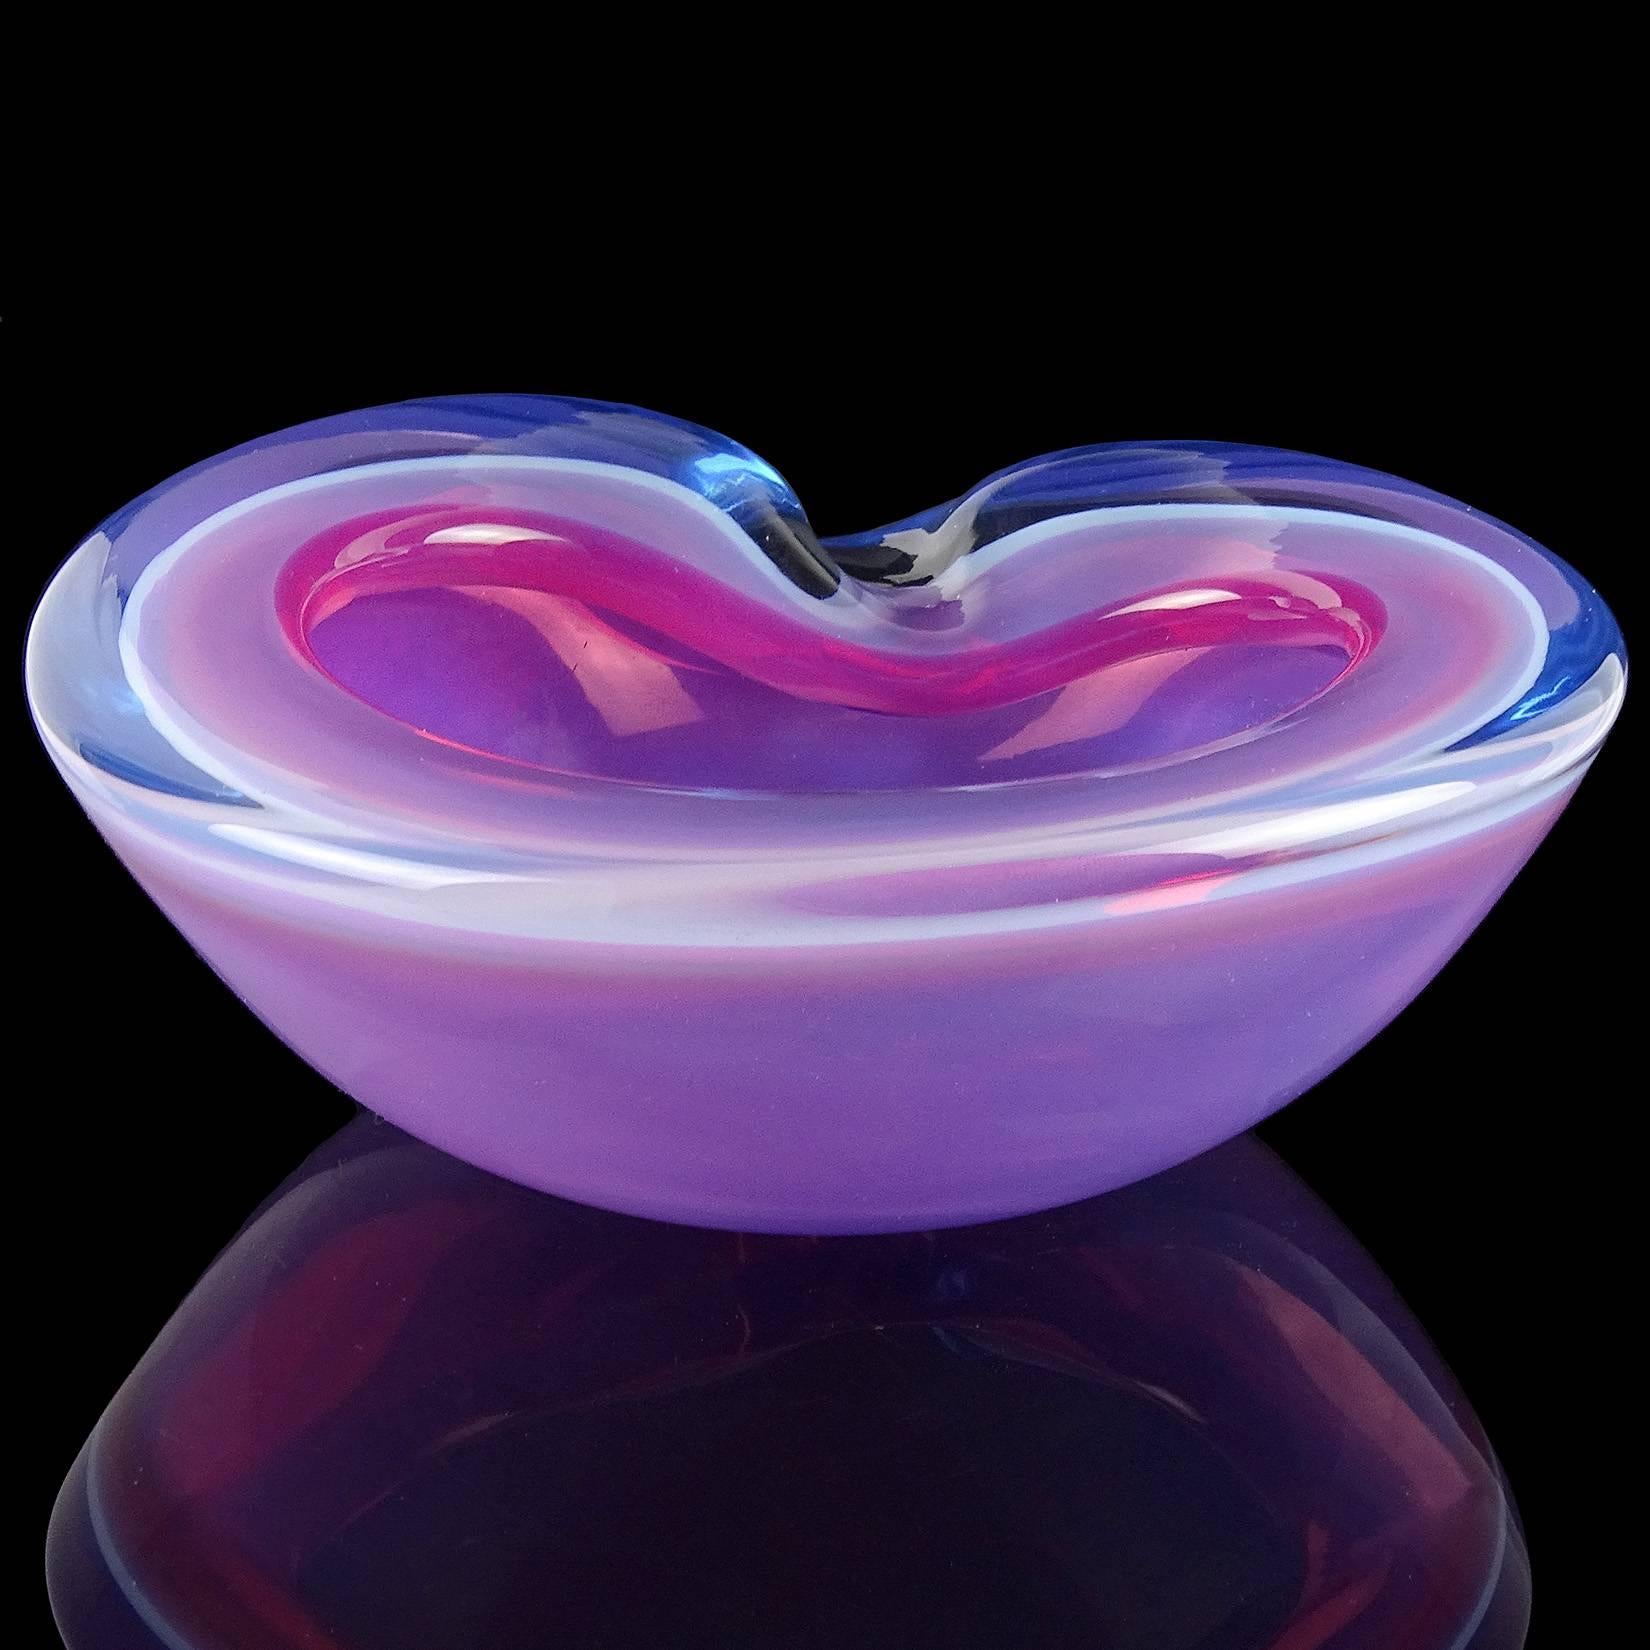 Beautiful Murano hand blown Sommerso opalescent pink and blue Italian art glass bowl / dish. Documented to designer Alfredo Barbini. It has a folded over rim with decorative indent. In a darker background, the opal glass will really stand out.